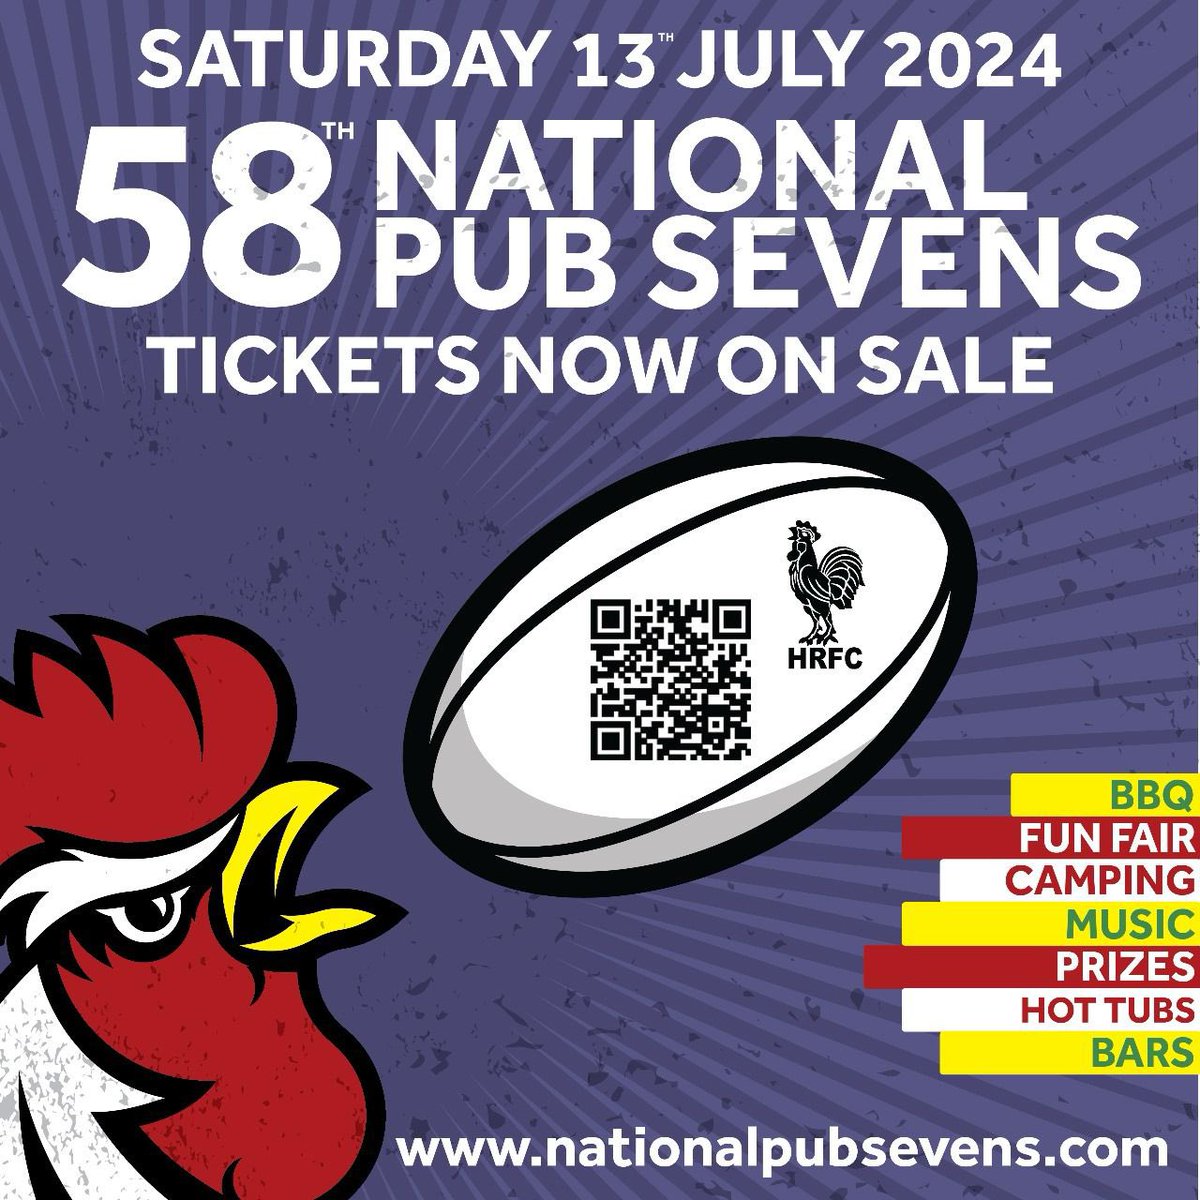 An epic day of rugby 7s and entertainment coming up in July. Purchase your spectator tickets now 🏉 🏆